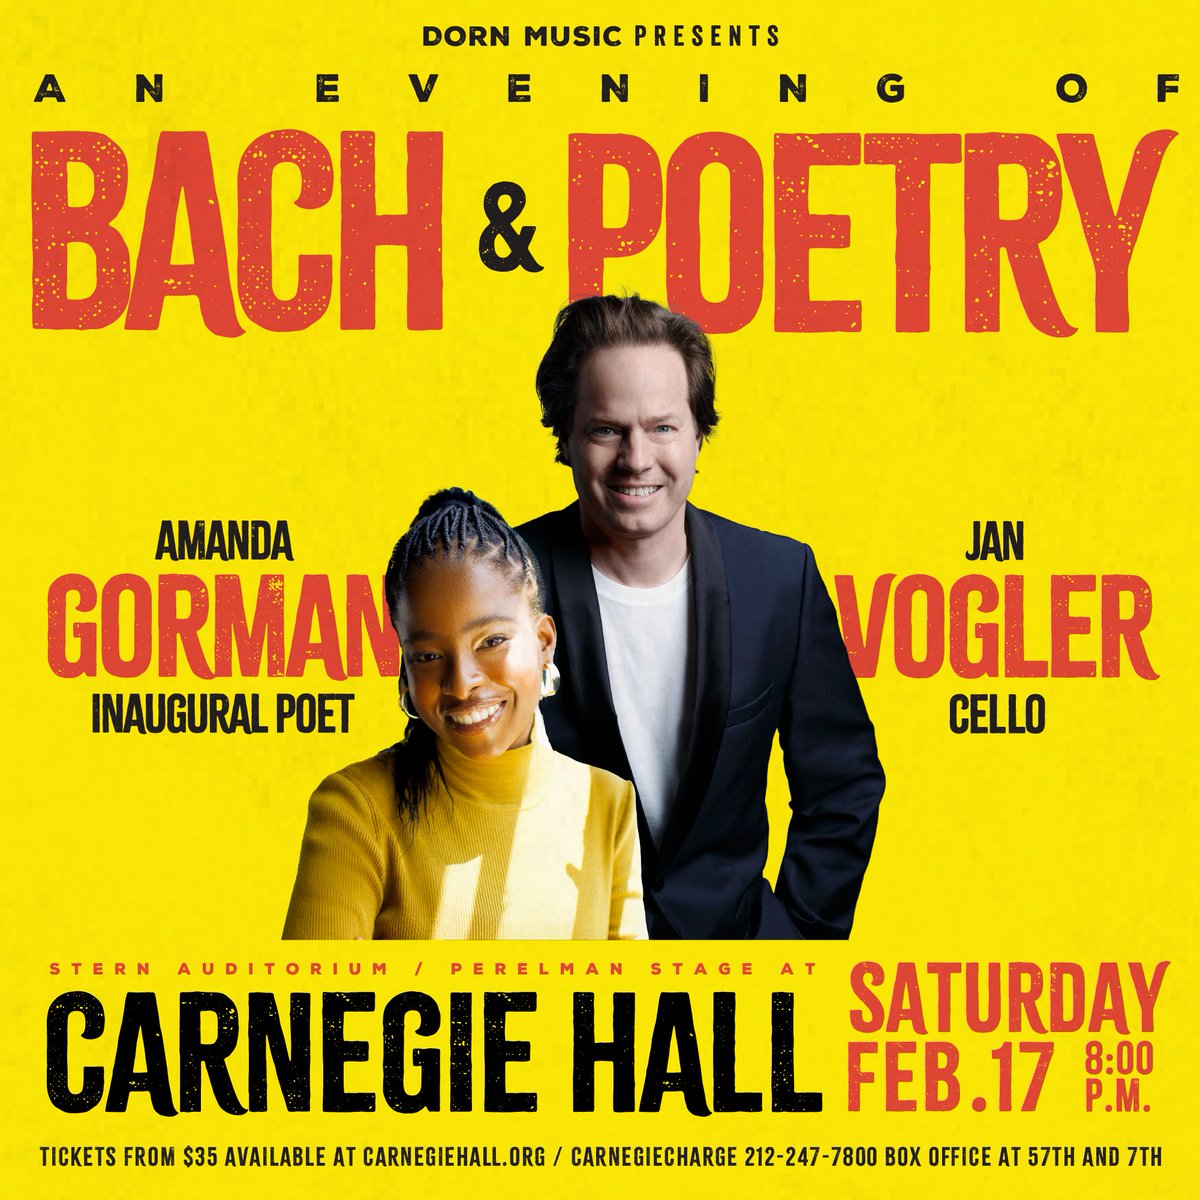 Experience an evening of Bach's most famous cello suites combined with the spoken word poetry of a bestselling author as Jan Vogler and Amanda Gorman take the stage at @carnegiehall on February 17th! For tickets, visit: carnegiehall.org/Calendar/2024/…